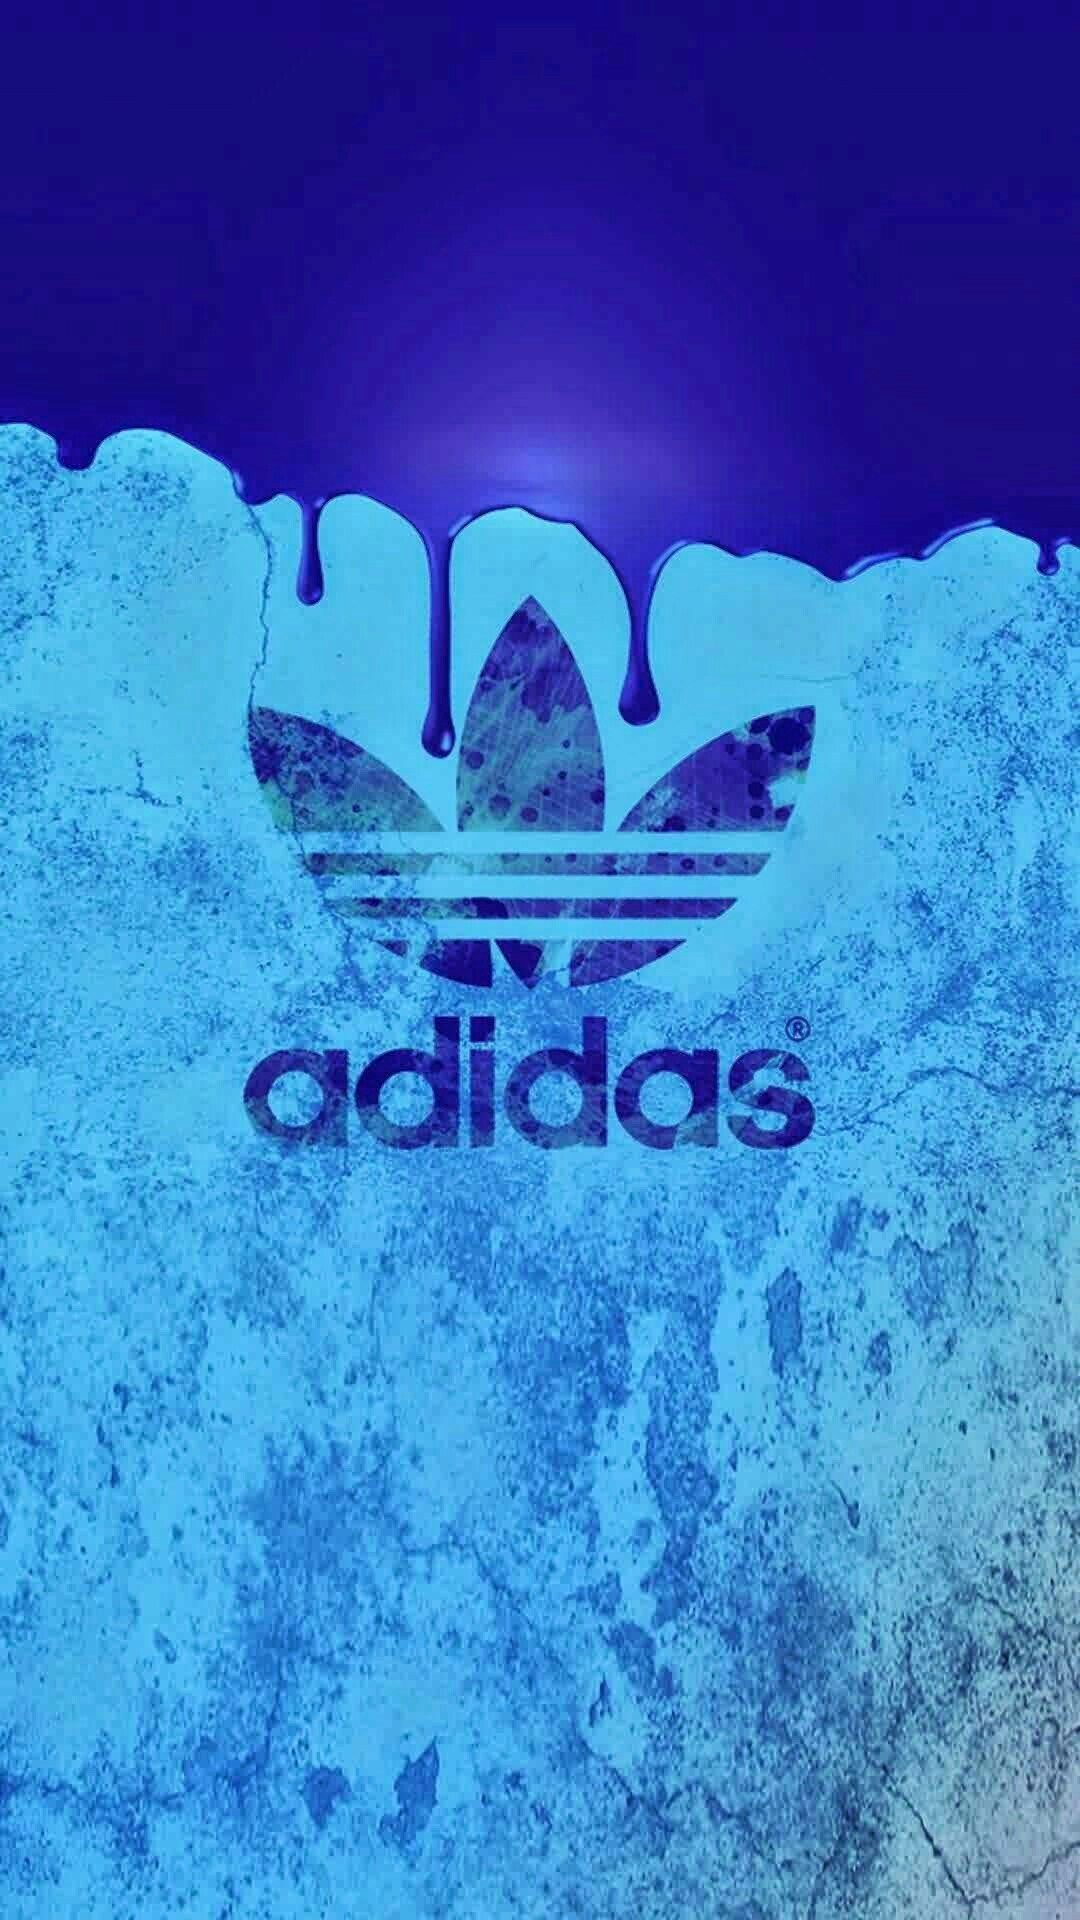 Adidas Luxury 580 Best iPhone Wallpaper iPhone Full HD Wallpaper Background This Month of The Hudson